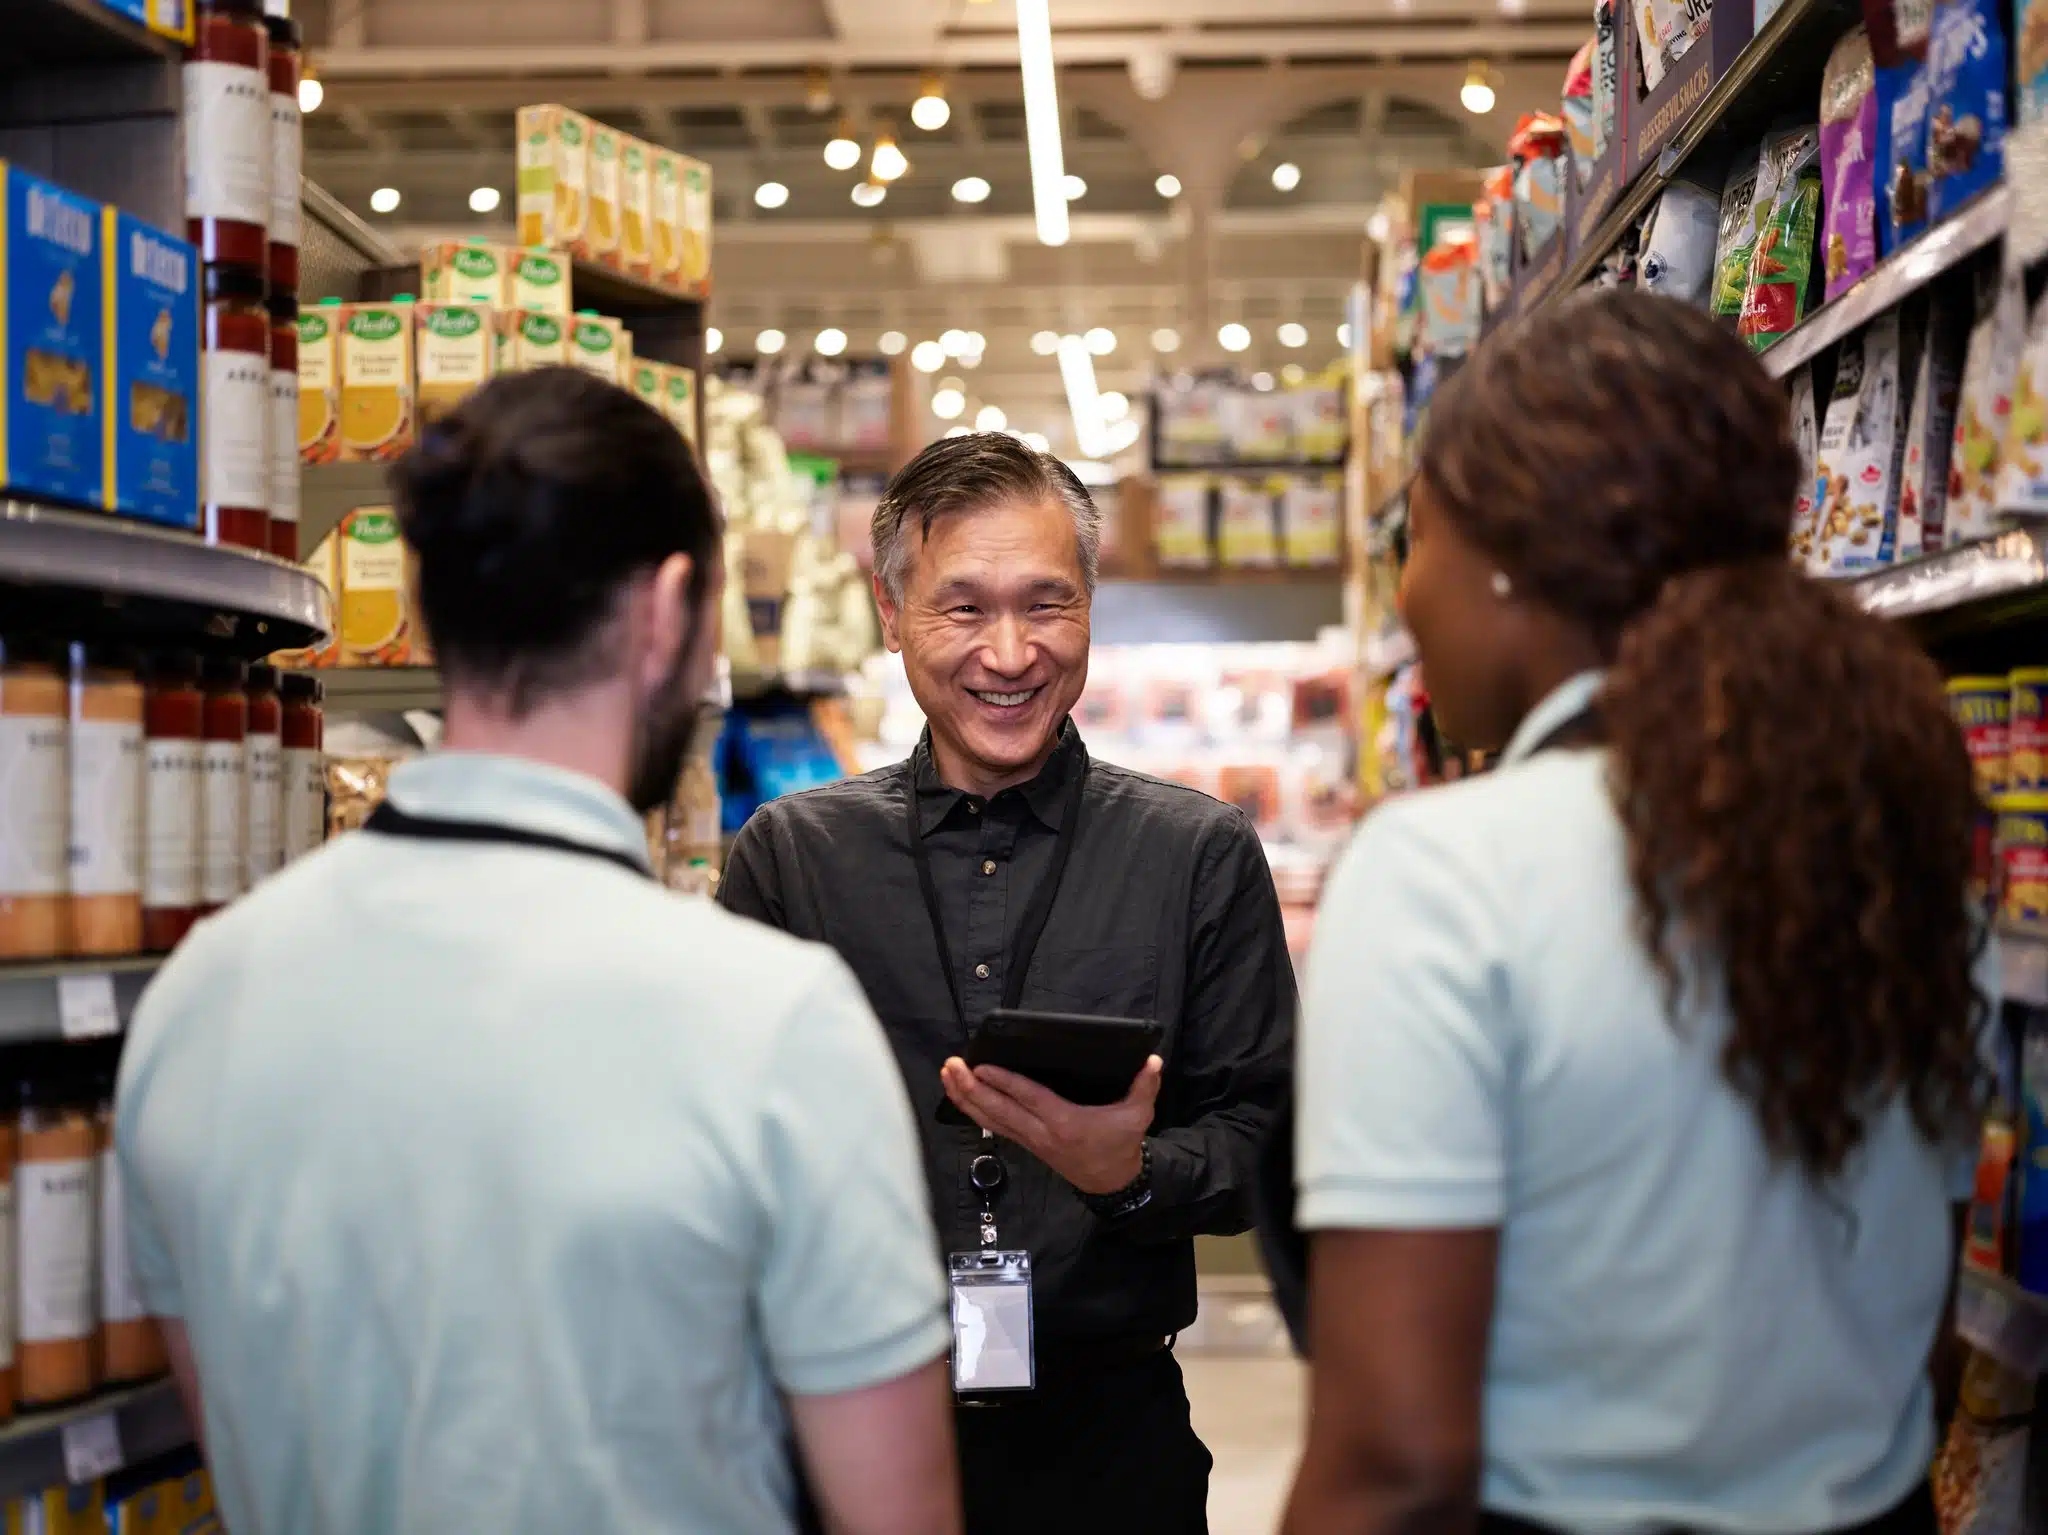 Grocery store manager training employees with technology.